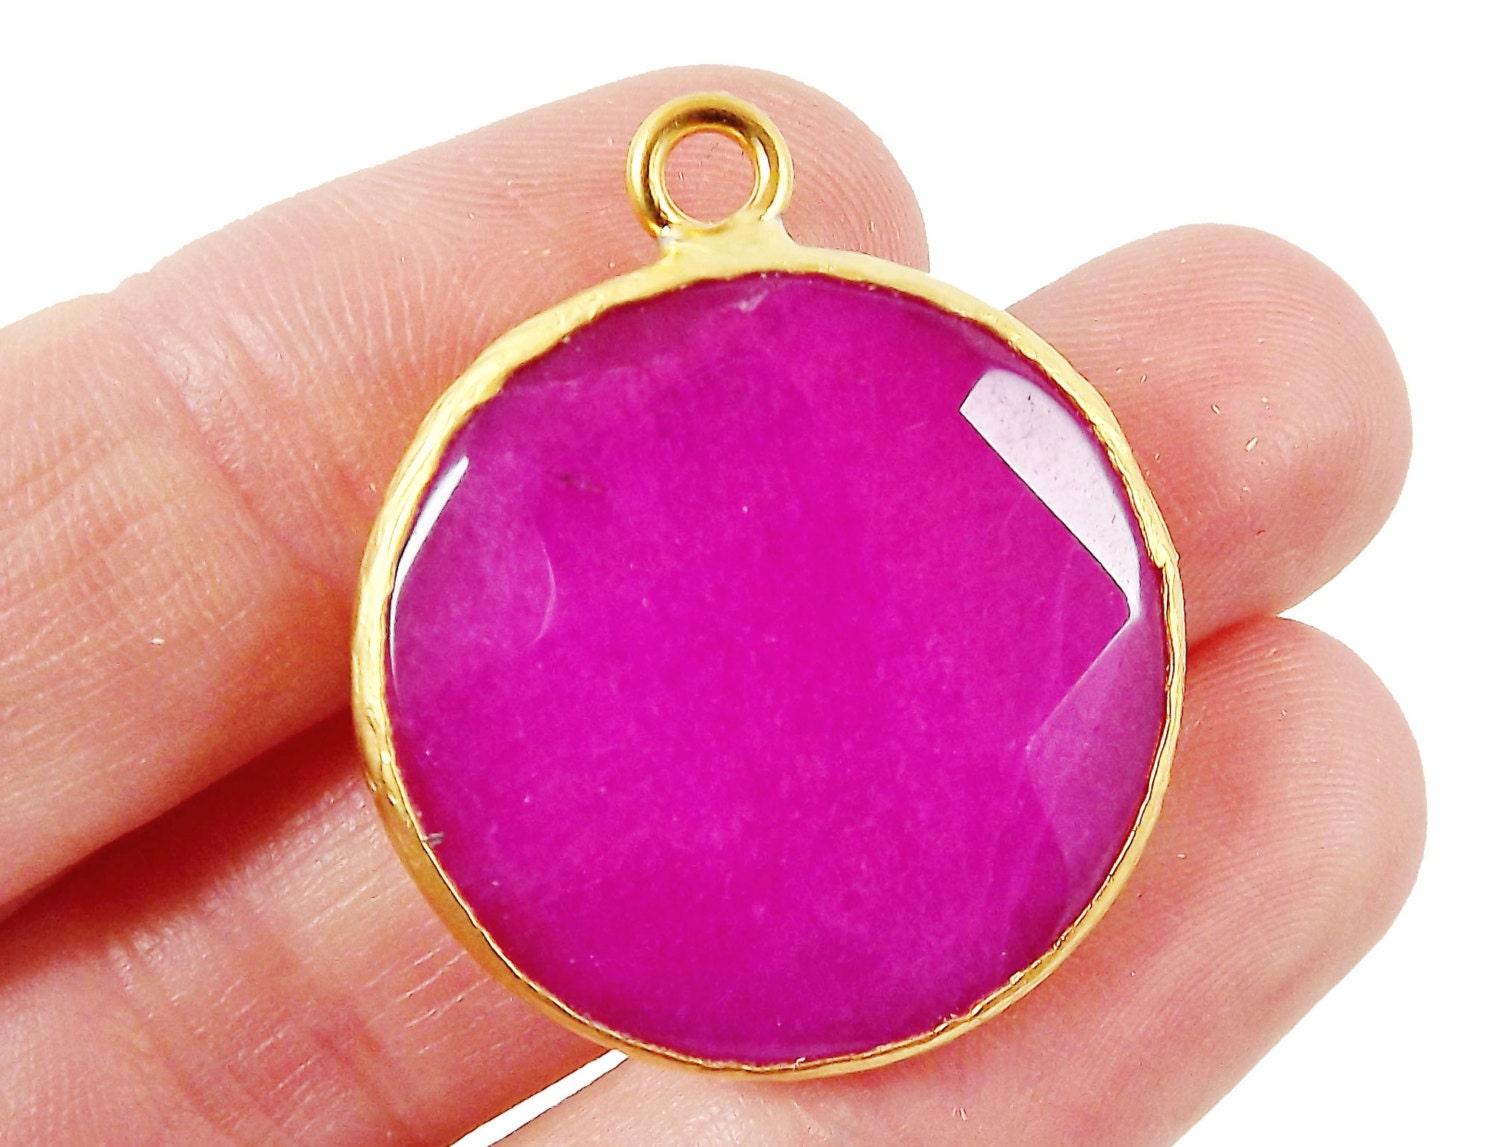 26mm Fuchsia Pink Faceted Jade Pendant - Gold plated Bezel - 1pc